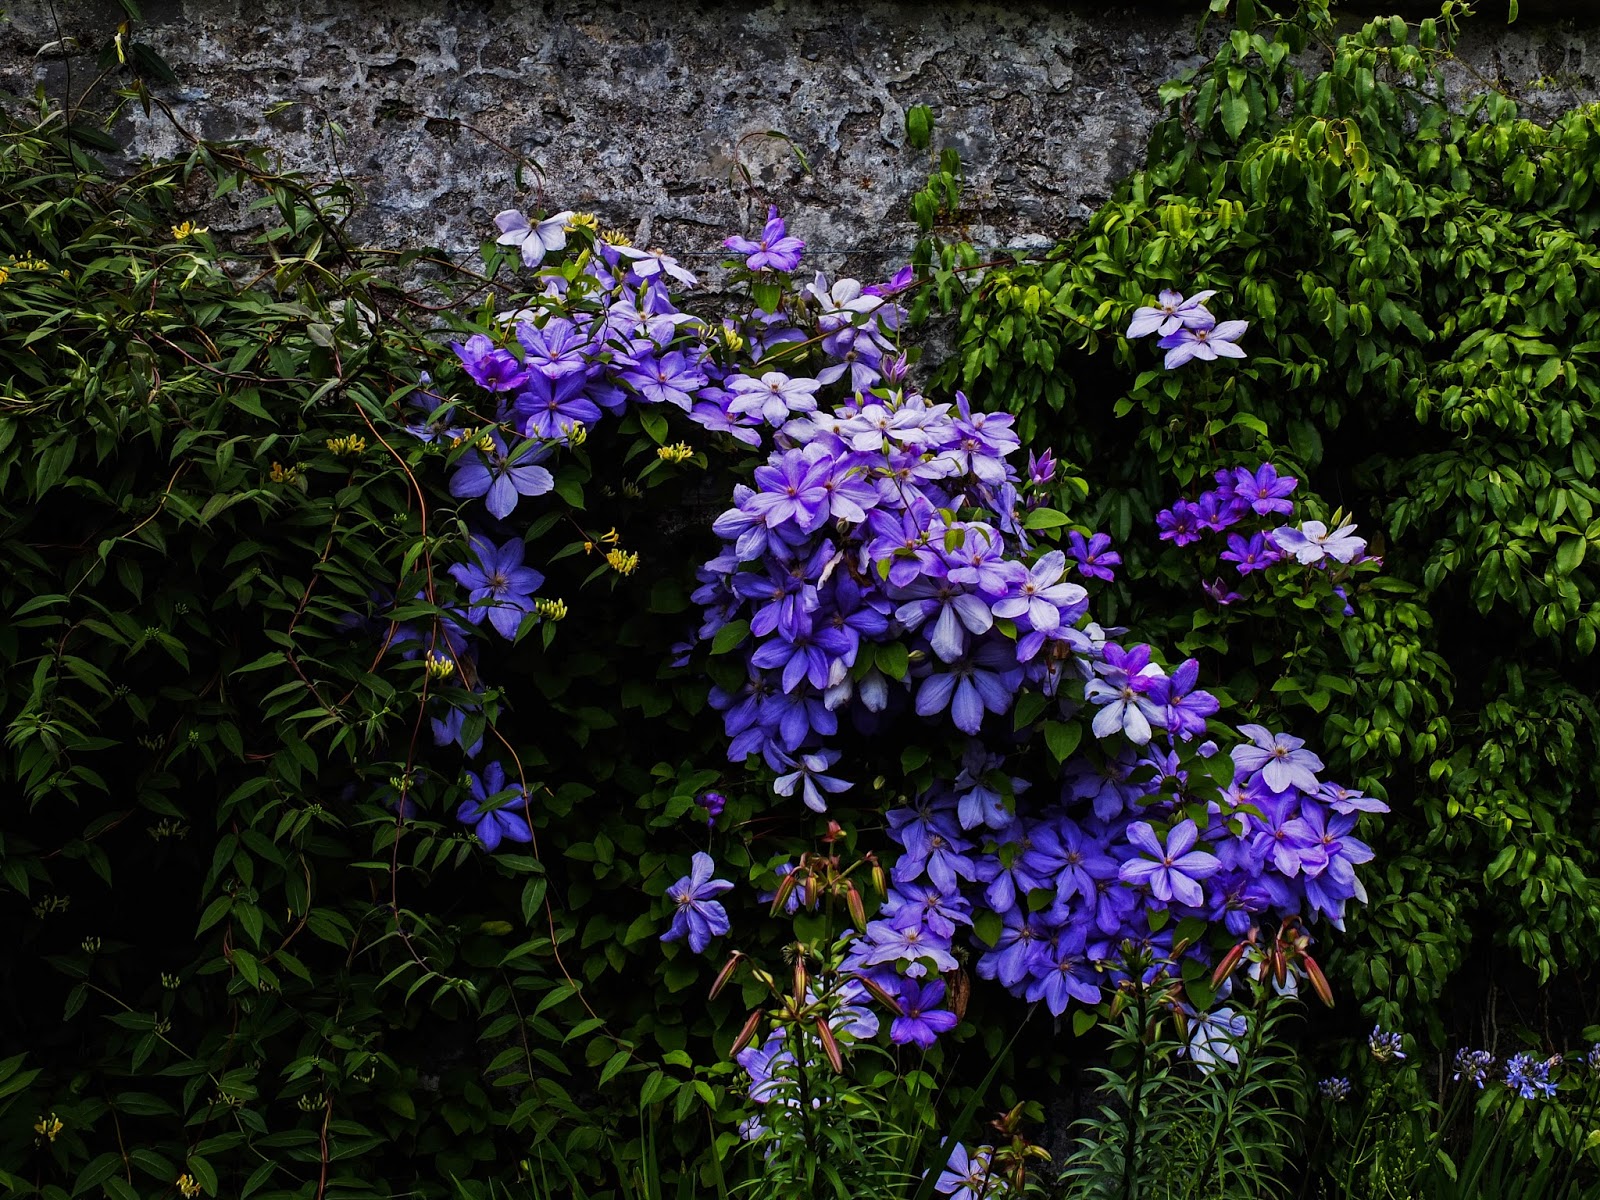 A Wisteria plant growing on a stone wall in Fota Gardens.